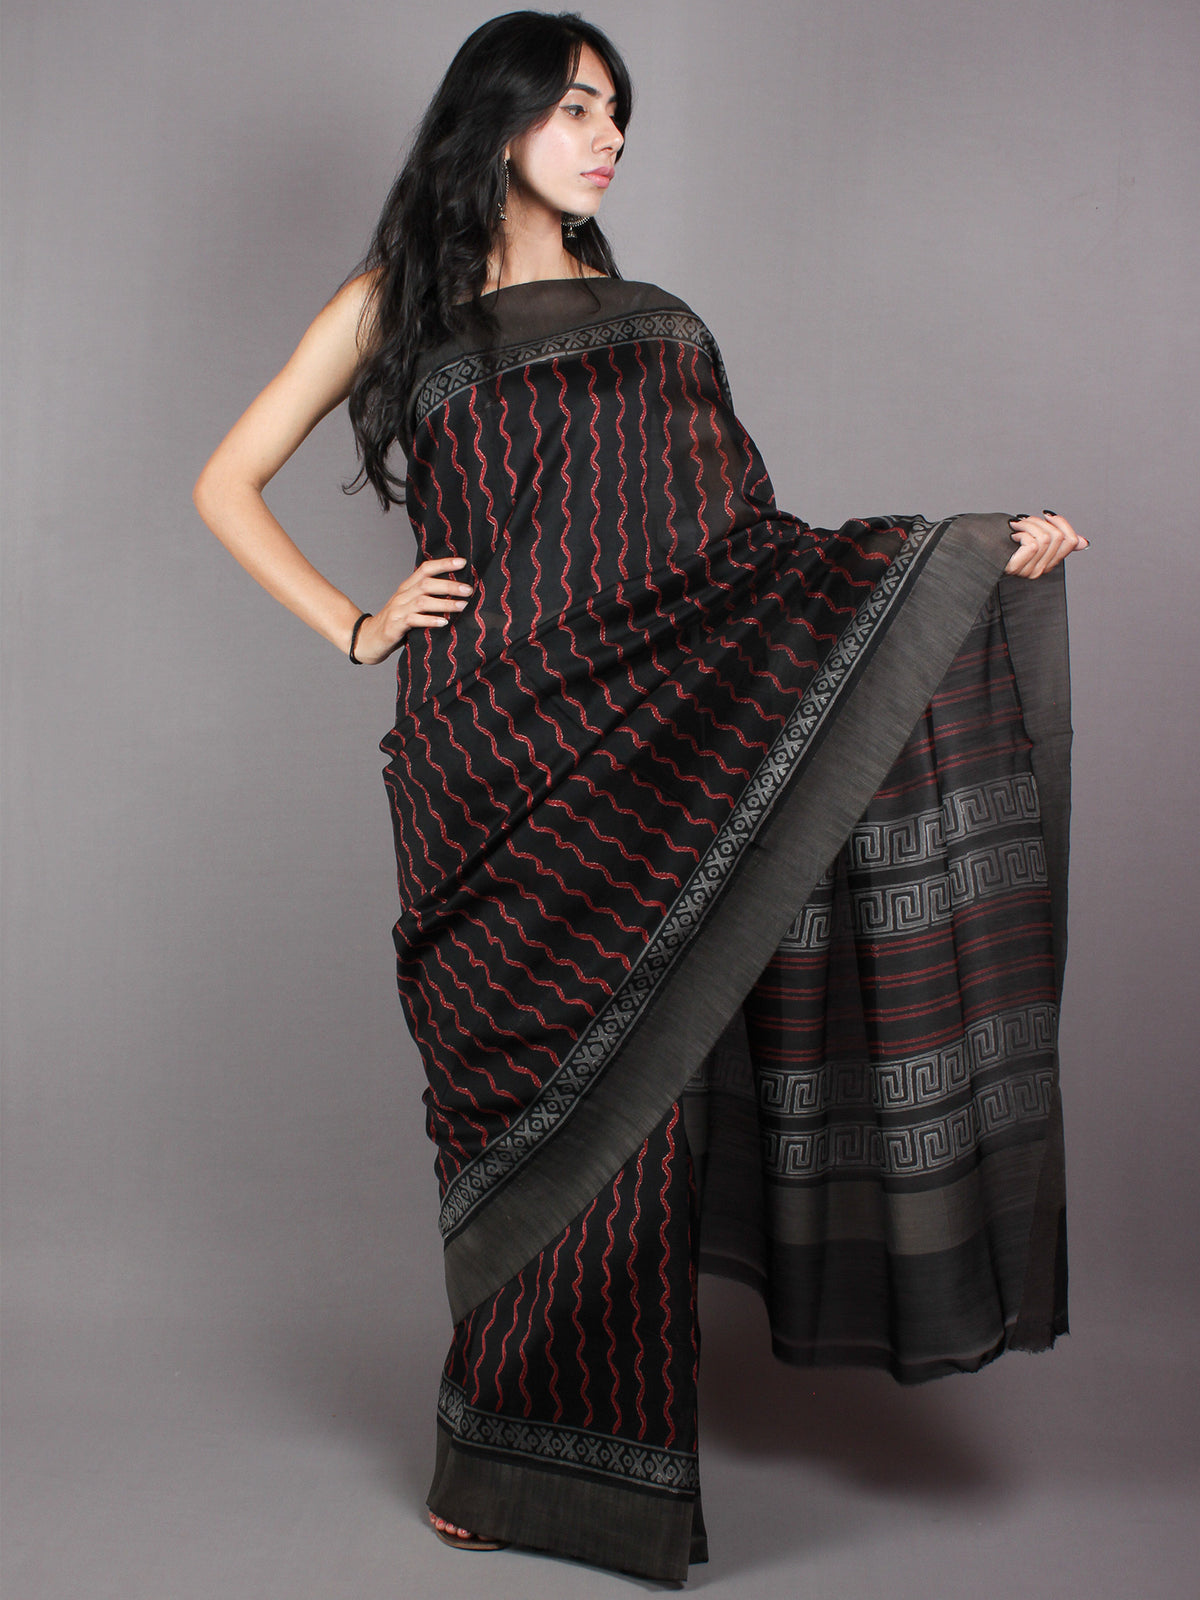 Black Red Hand Block Printed in Natural Vegetable Colors Chanderi Saree With Geecha Border - S03170389